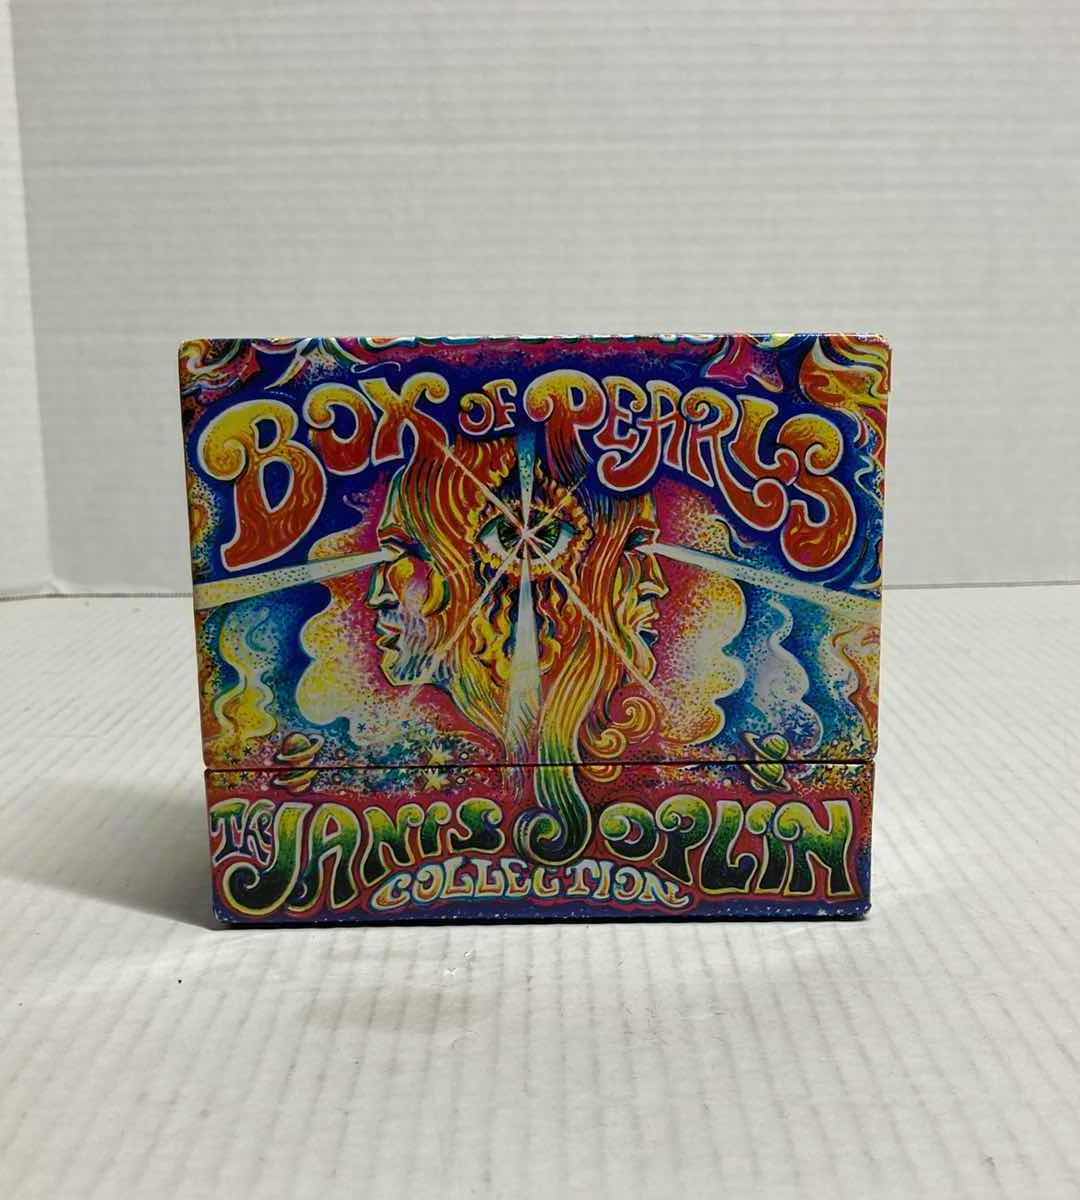 Photo 1 of JANIS JOPLIN COLLECTION BOX OF PEARLS DISC SET